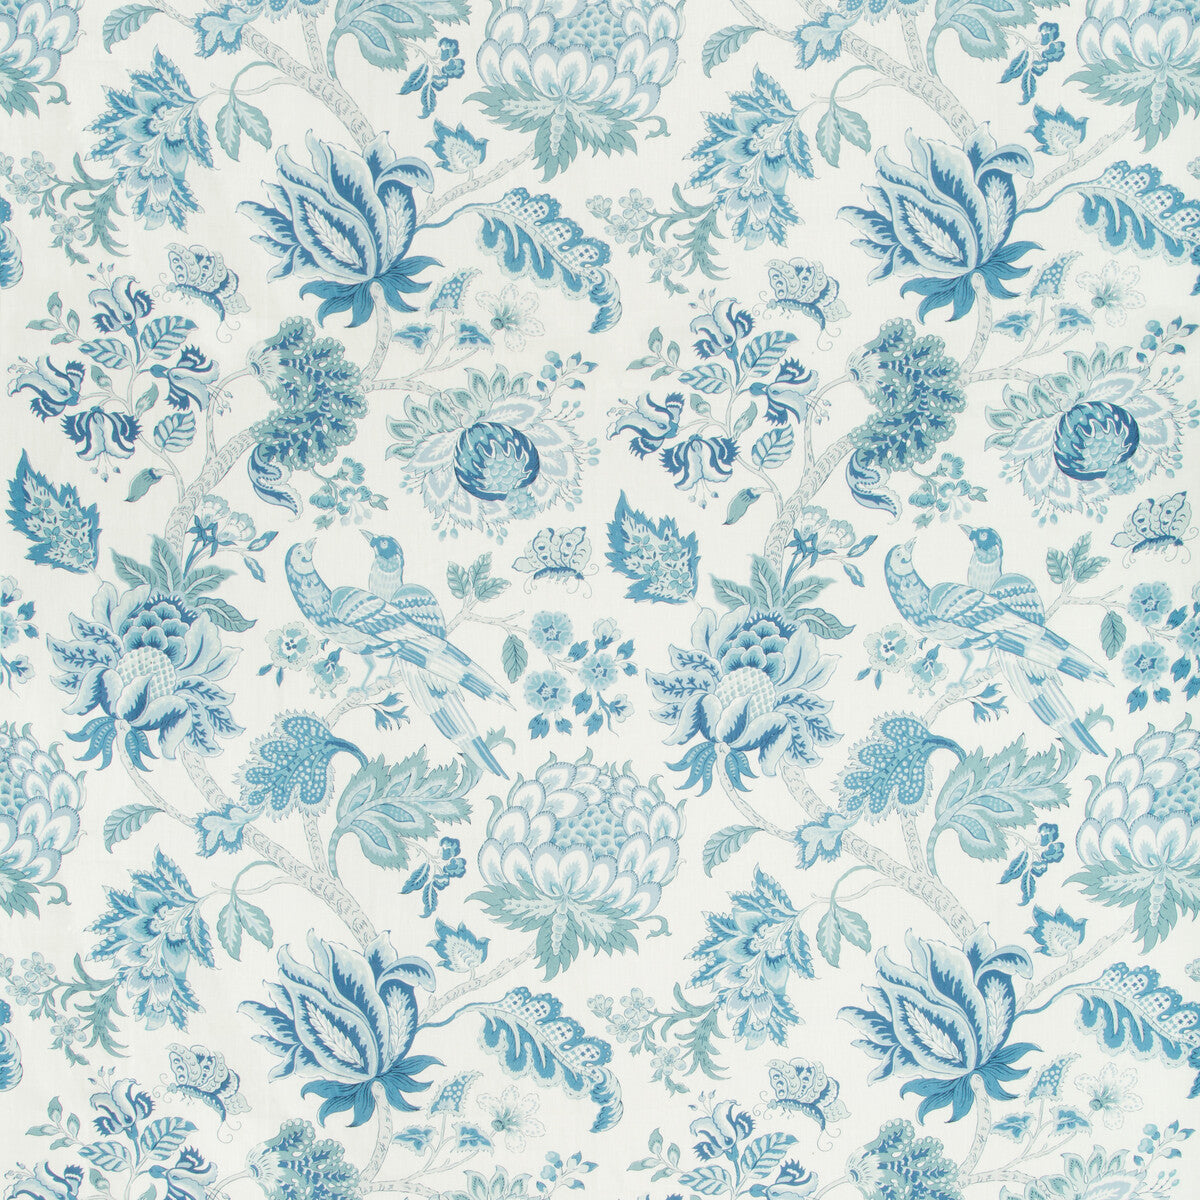 Lambrook fabric in hyacinth color - pattern LAMBROOK.5.0 - by Kravet Basics in the Greenwich collection